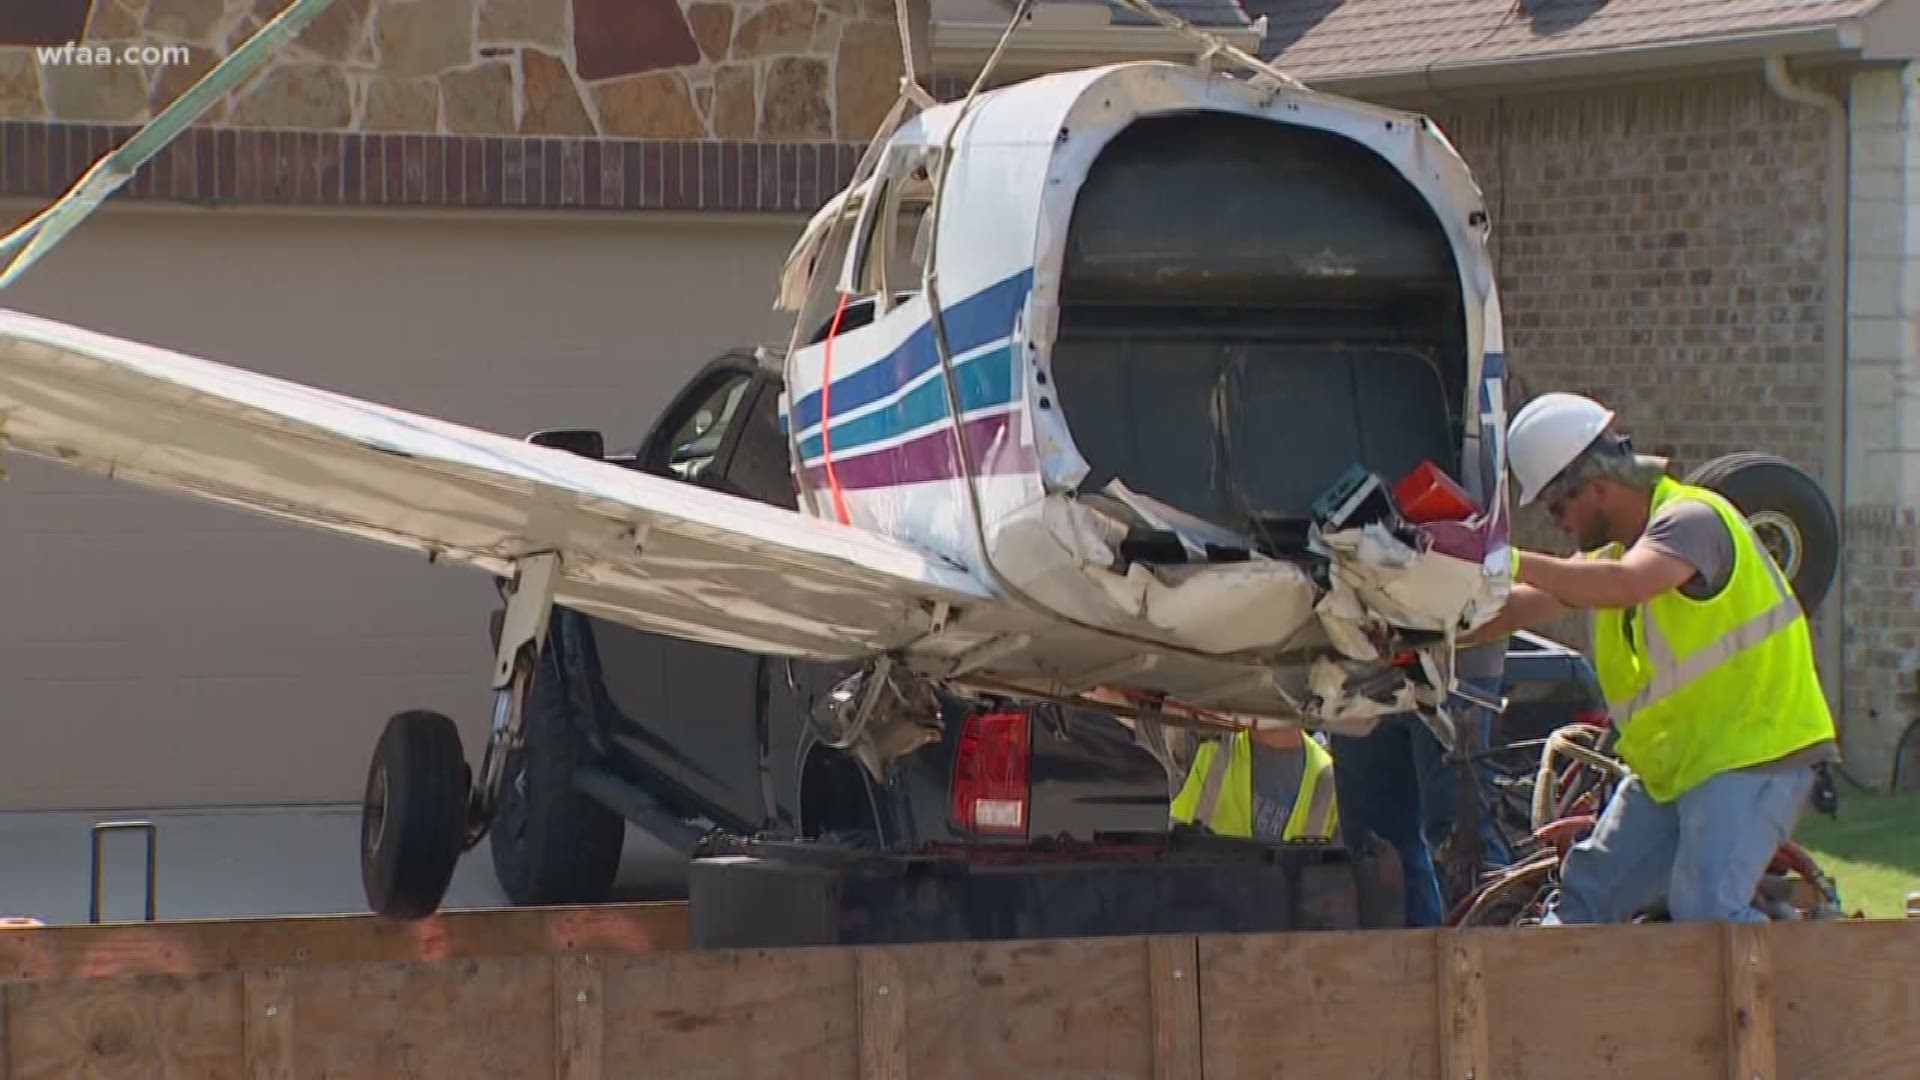 After a plane crashed into a McKinney home, a crane removed the aircraft Saturday from the backyard.